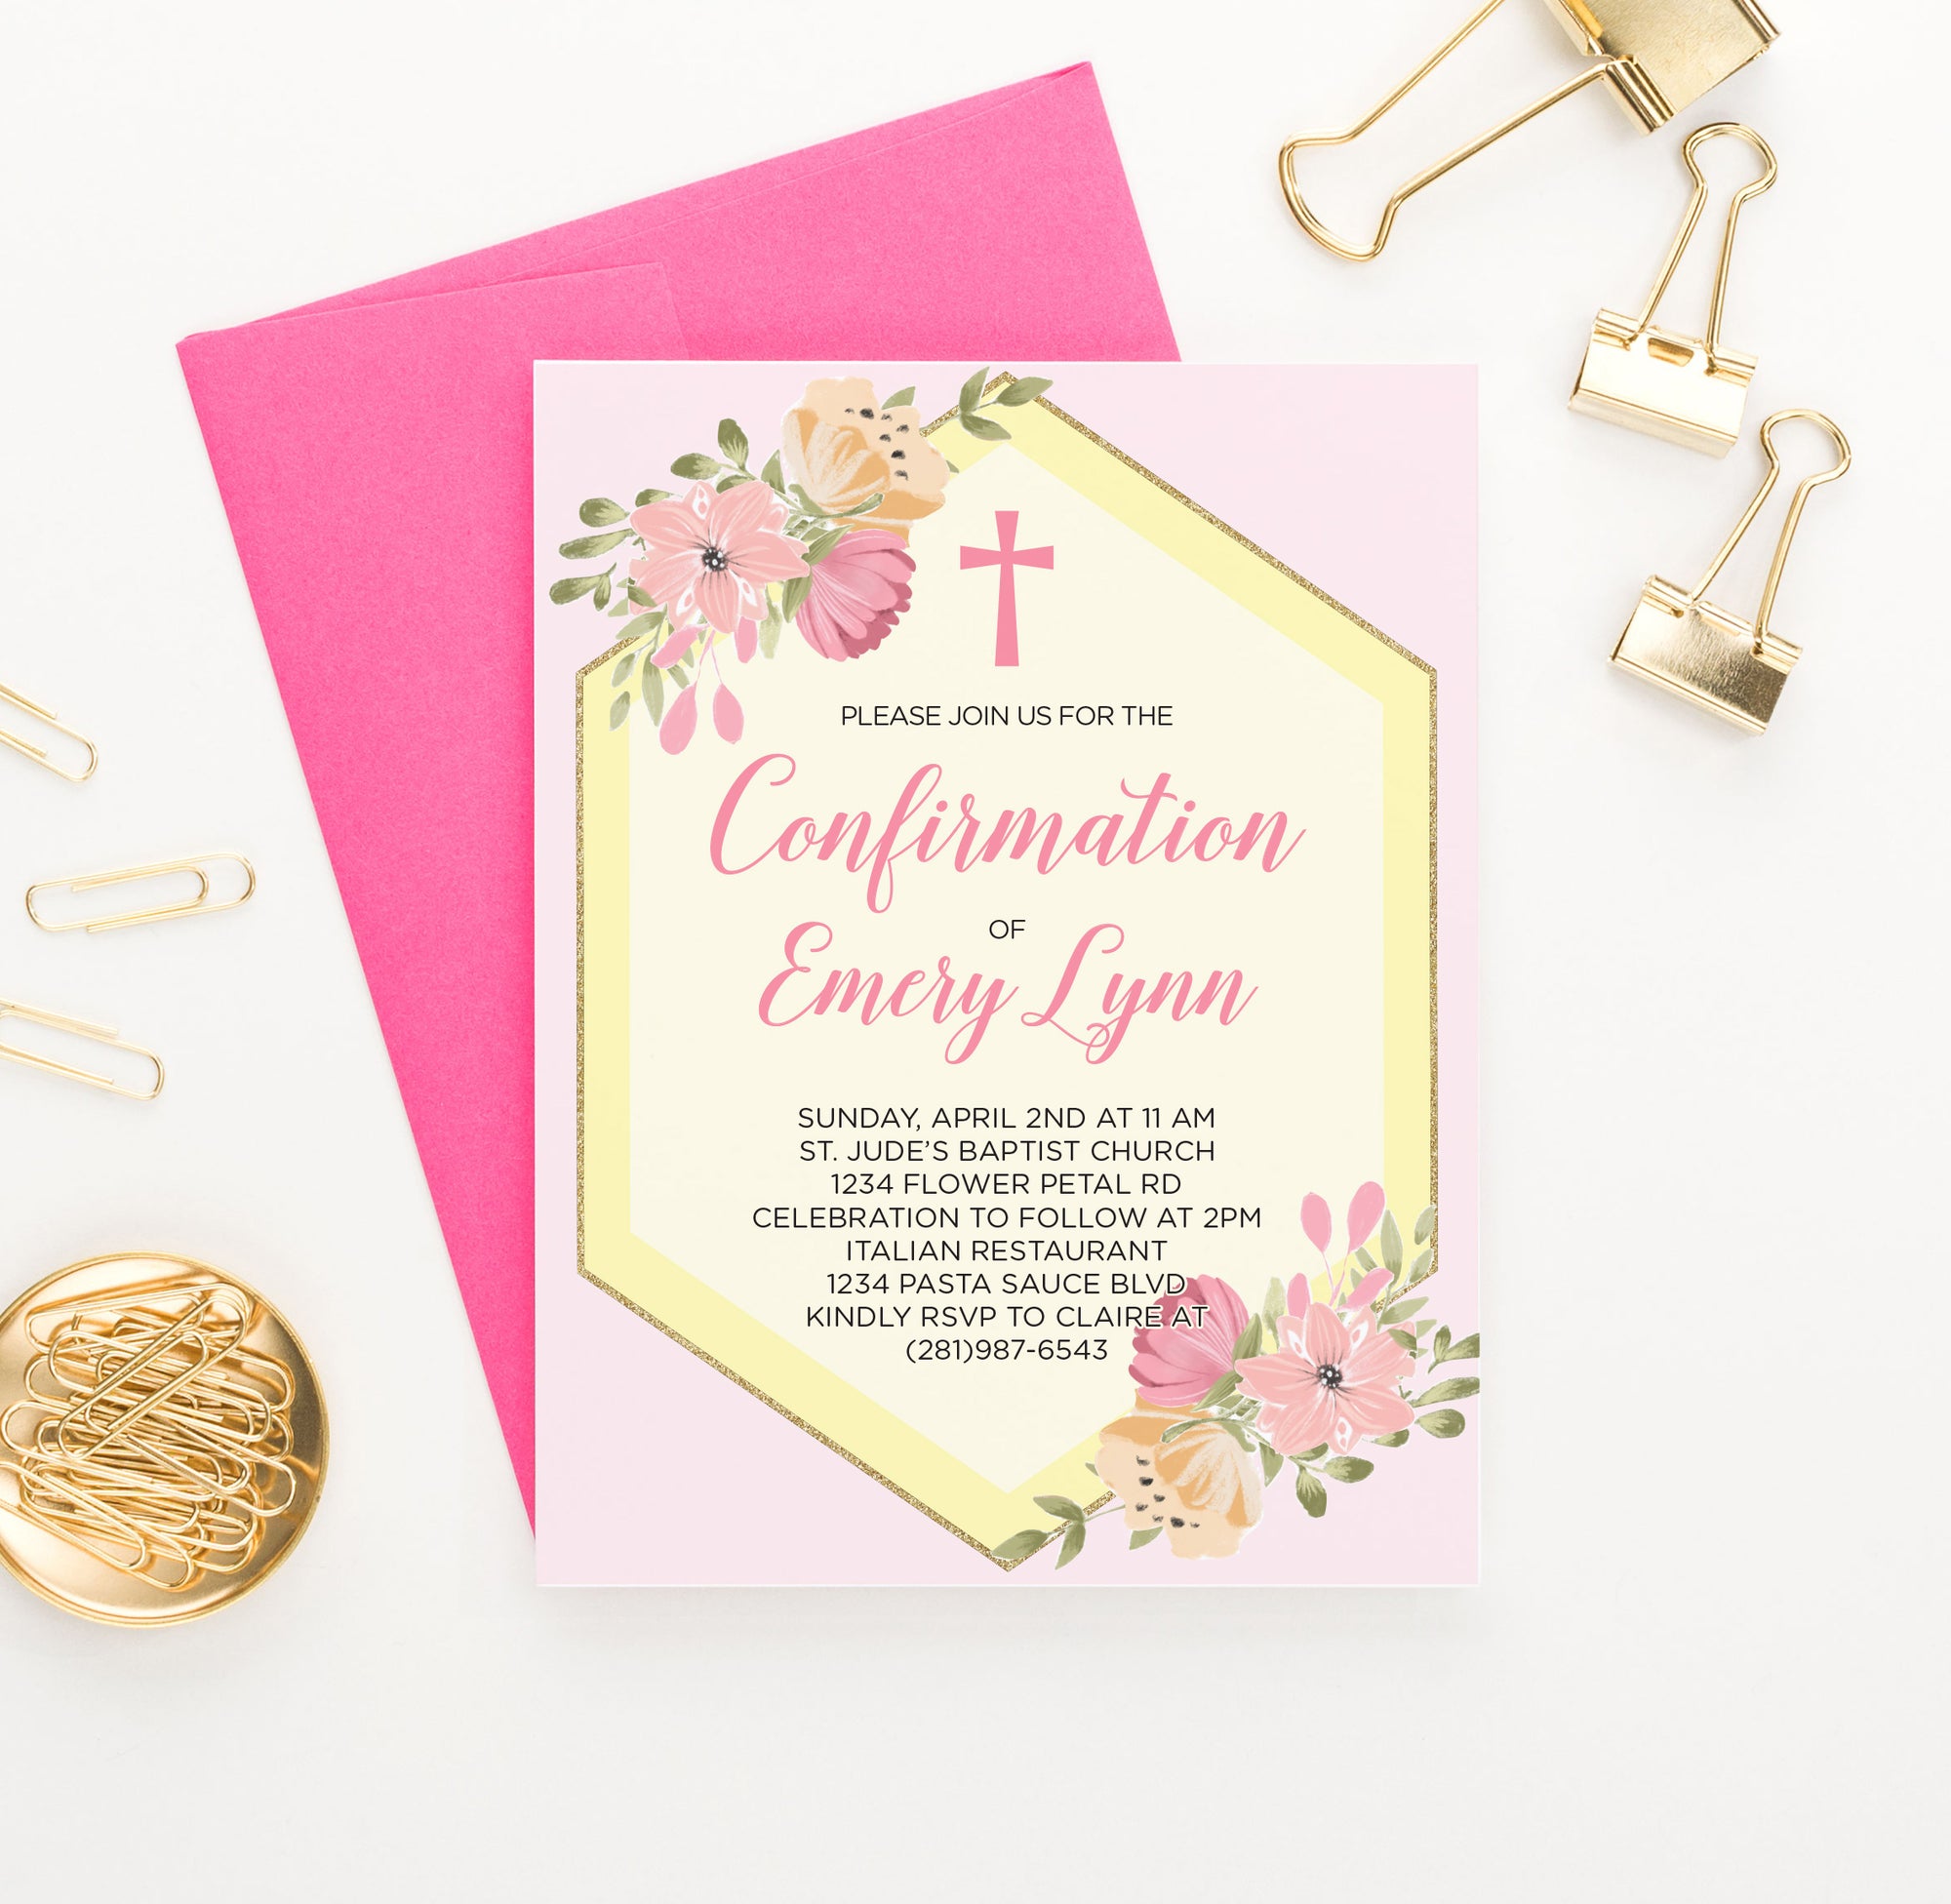 Personalized Pink And Yellow Confirmation Invitation Cards With Florals